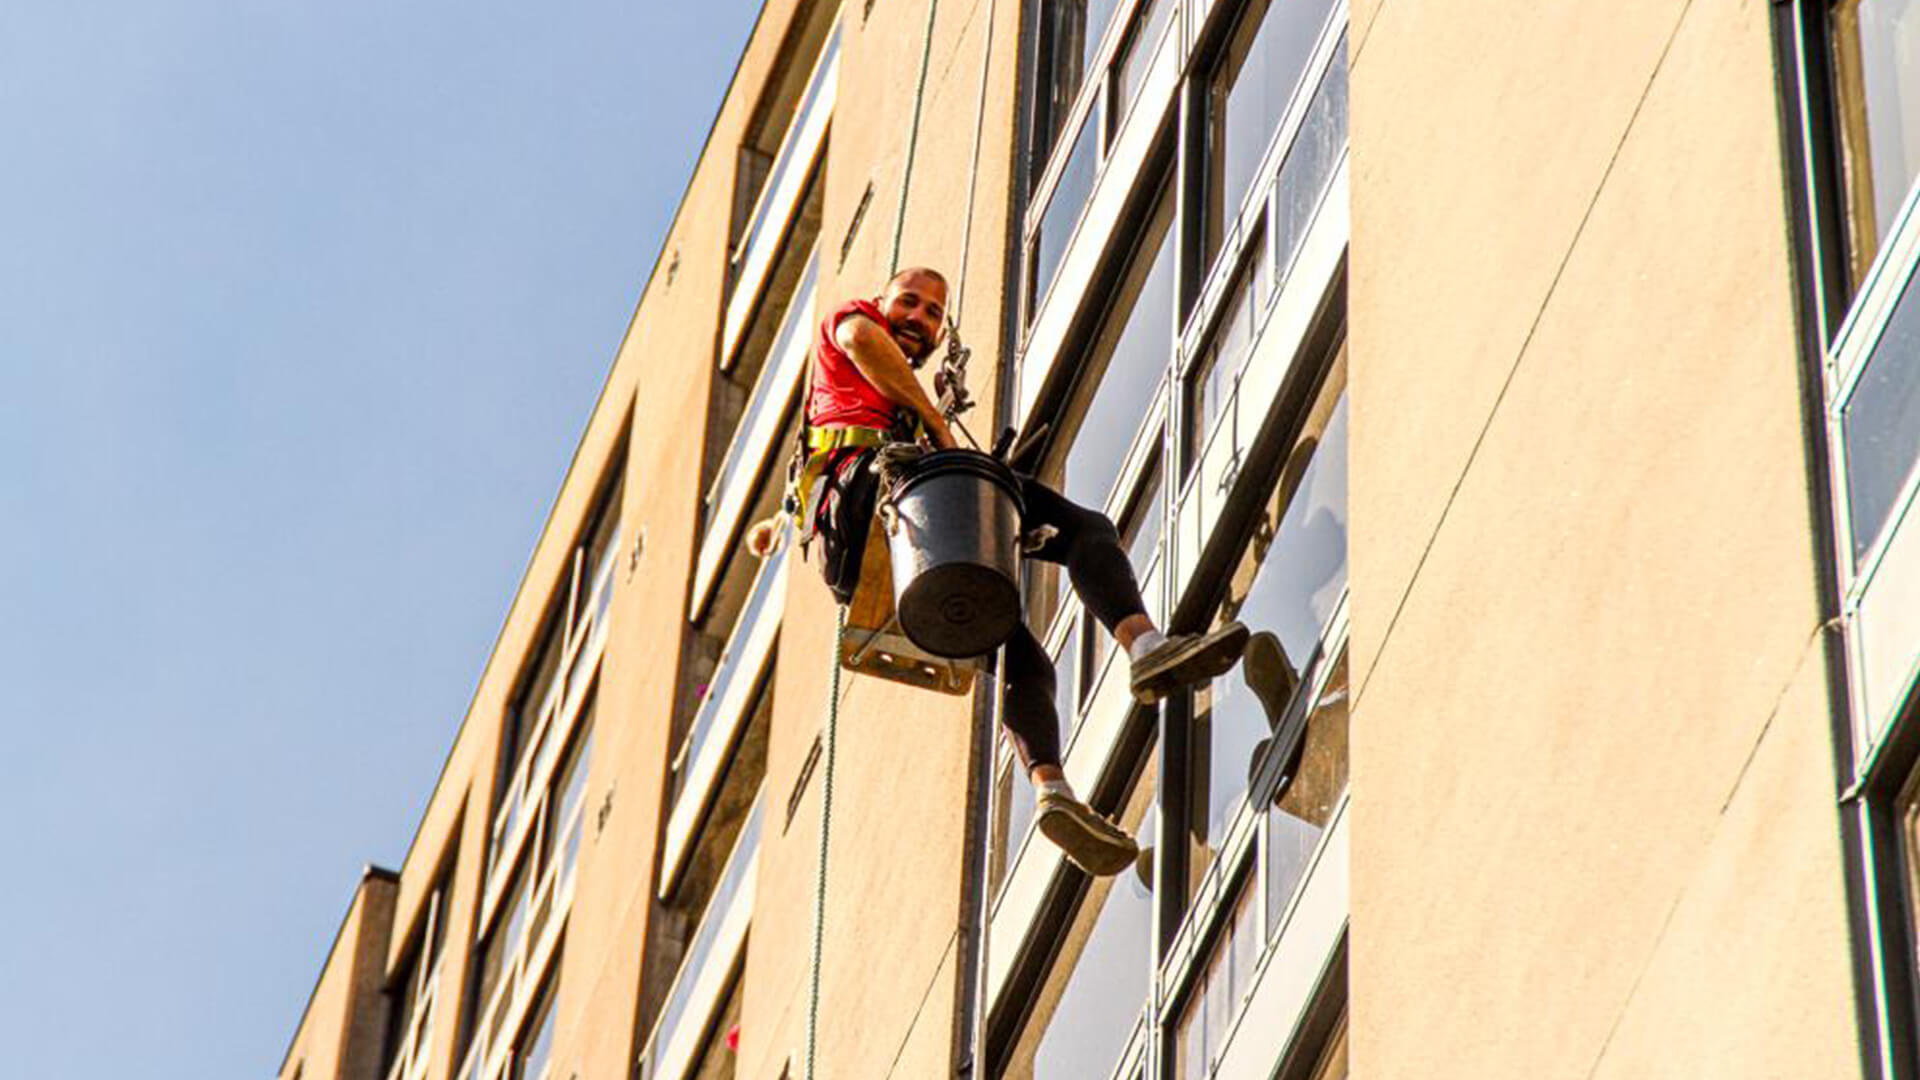 Toronto Window Cleaning Services, Pressure Washing Services and Power Washing Services